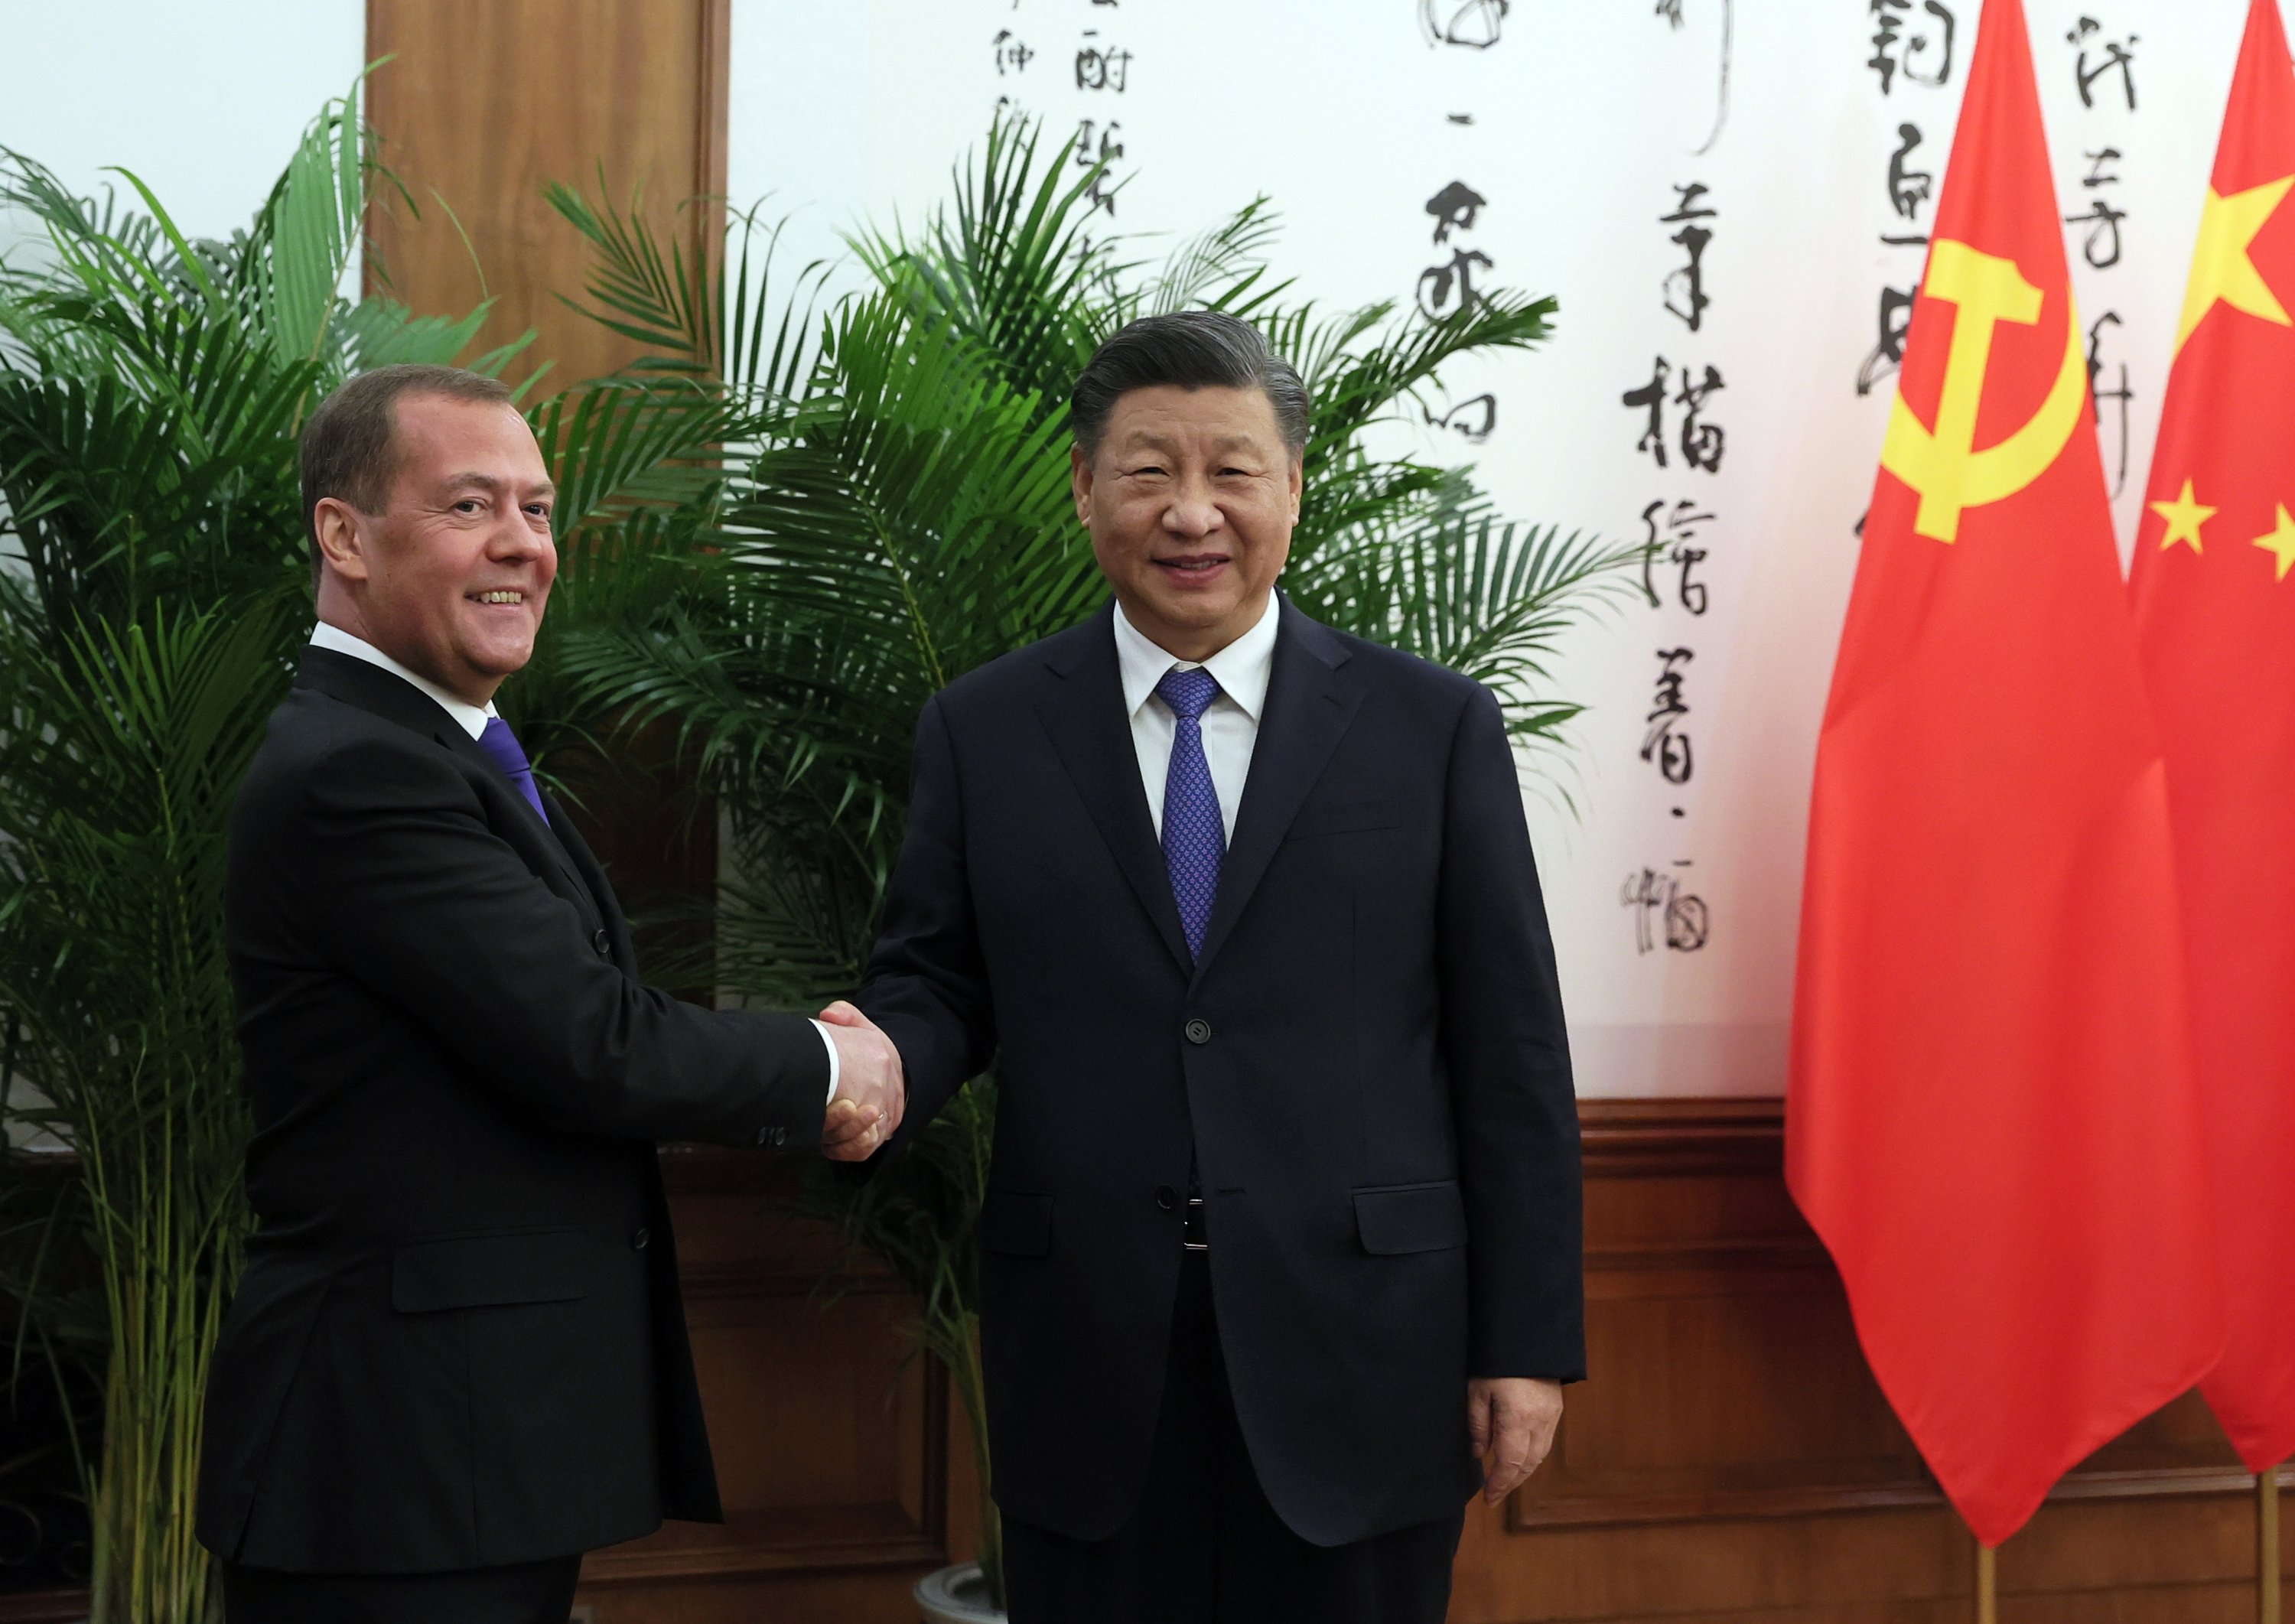 Russia's Medvedev meets China's Xi during surprise Beijing visit ...